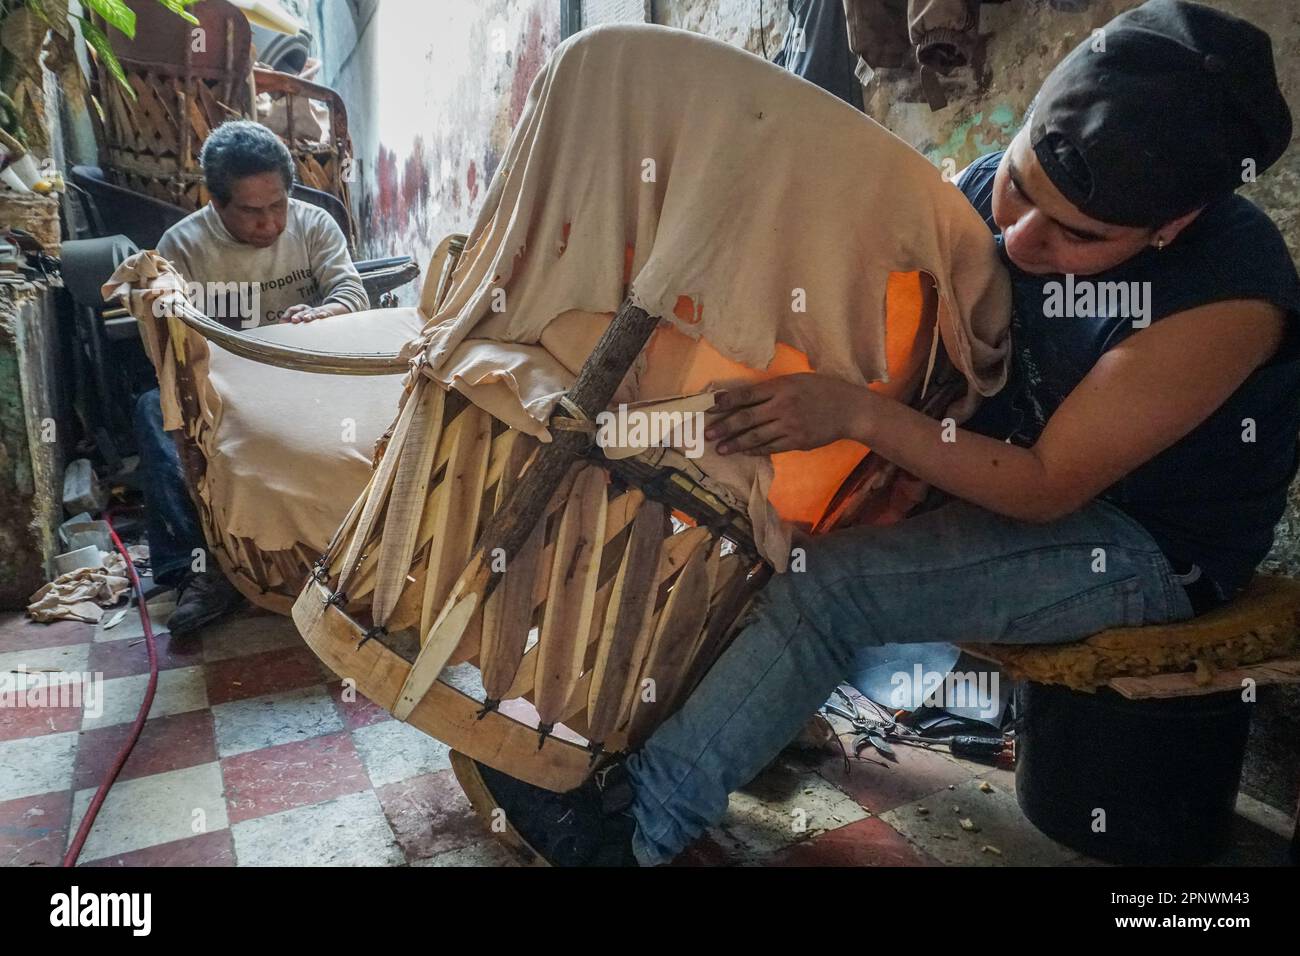 Raúl Sánchez, left, and Miguel Ángel Martínez make equipales, traditional Mexican chairs, using padding and pigskin in Guadalajara, Jalisco, Mexico on January 18, 2022. Sánchez says the trade has been difficult because many people don’t value handmade equipales and would rather buy cheaper goods. (Maya Piedra/Global Press Journal) Stock Photo